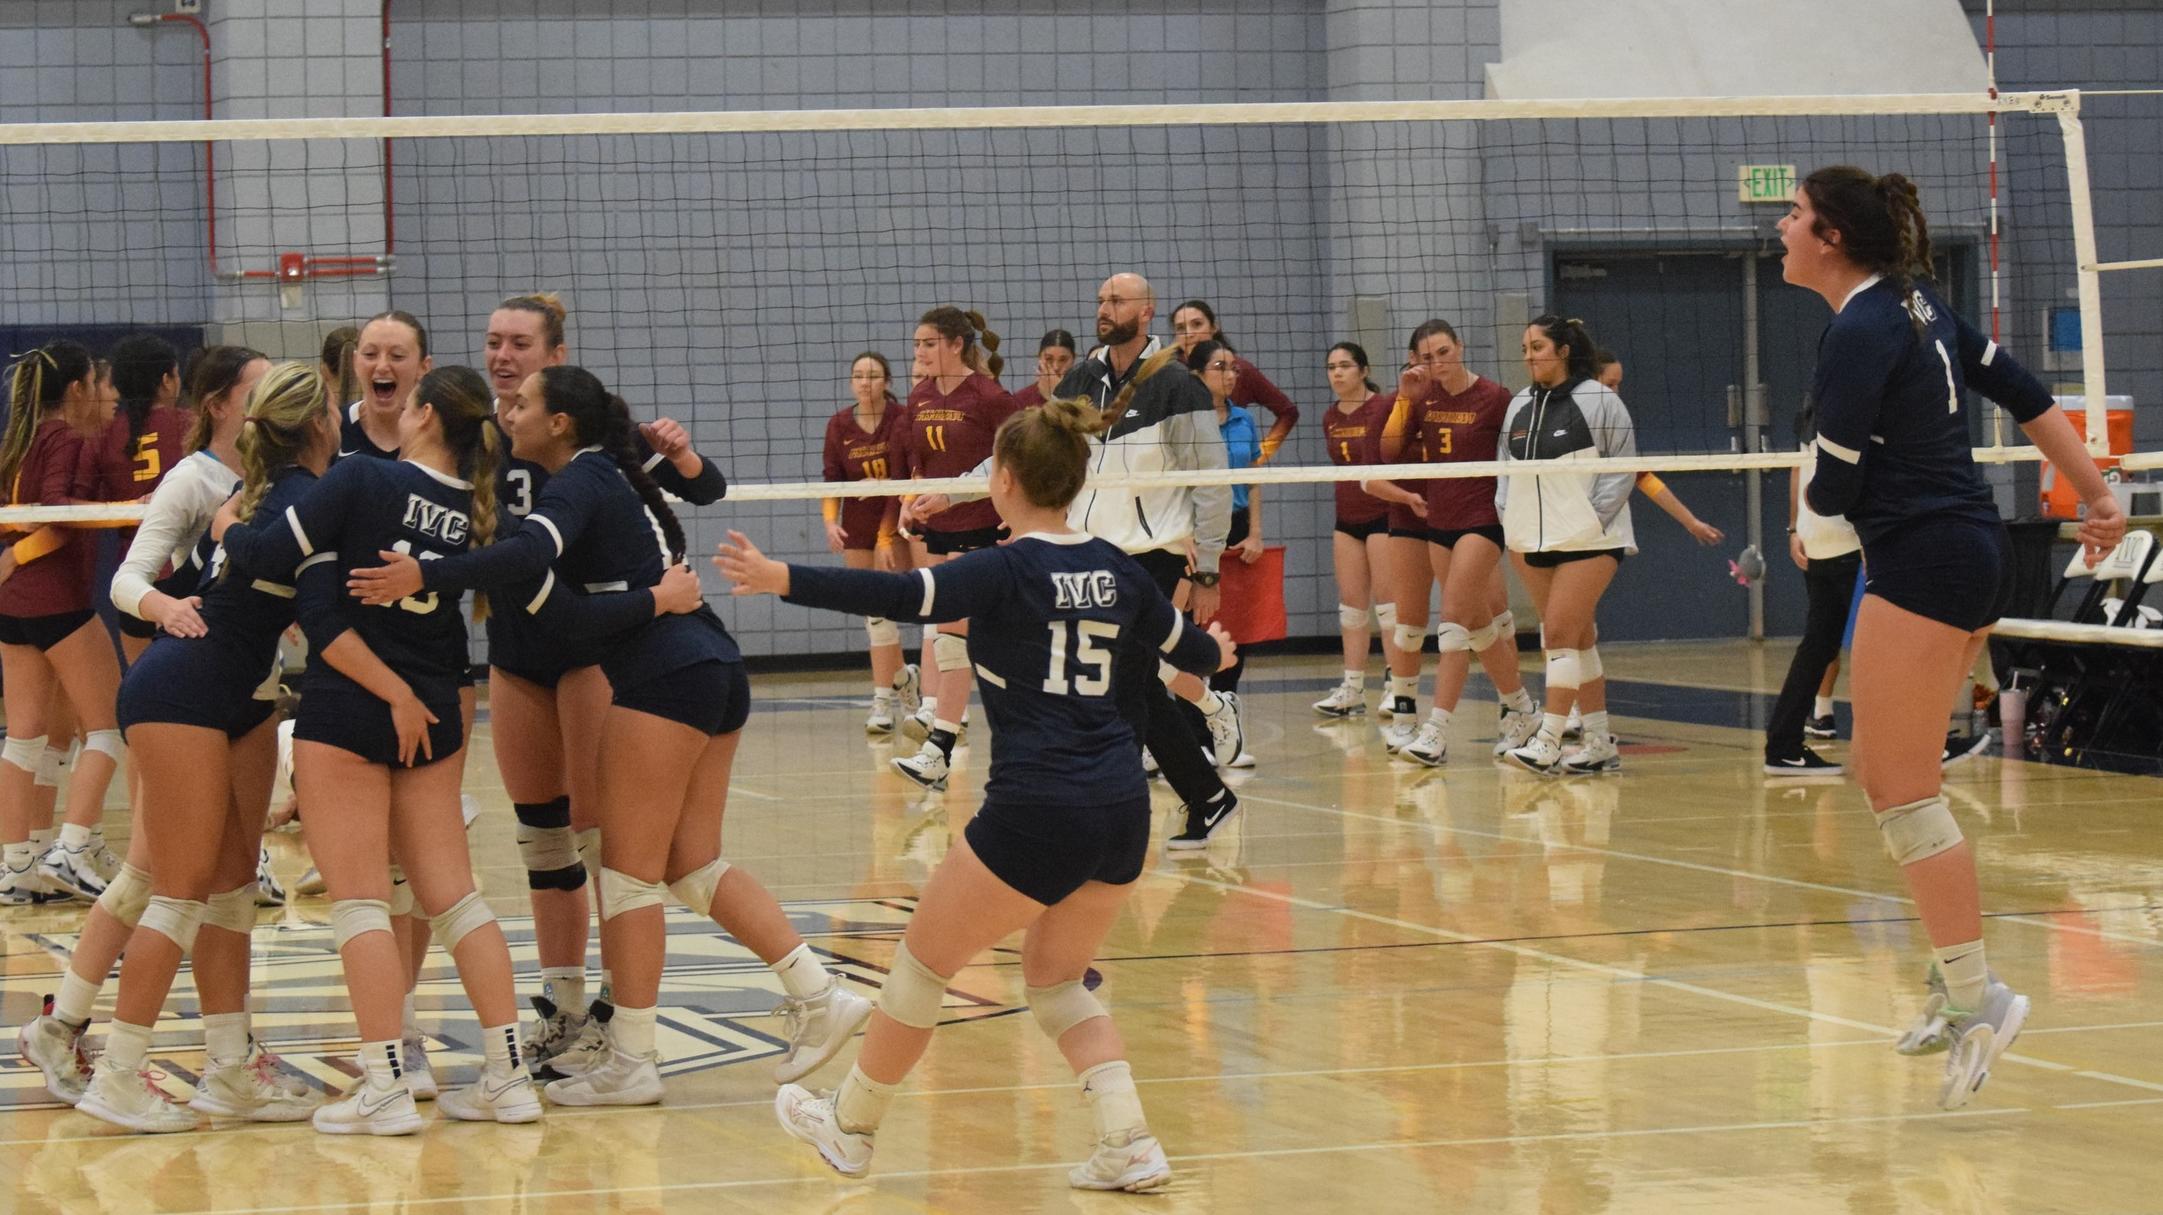 Women's volleyball team sweeps, moves on to regional finals